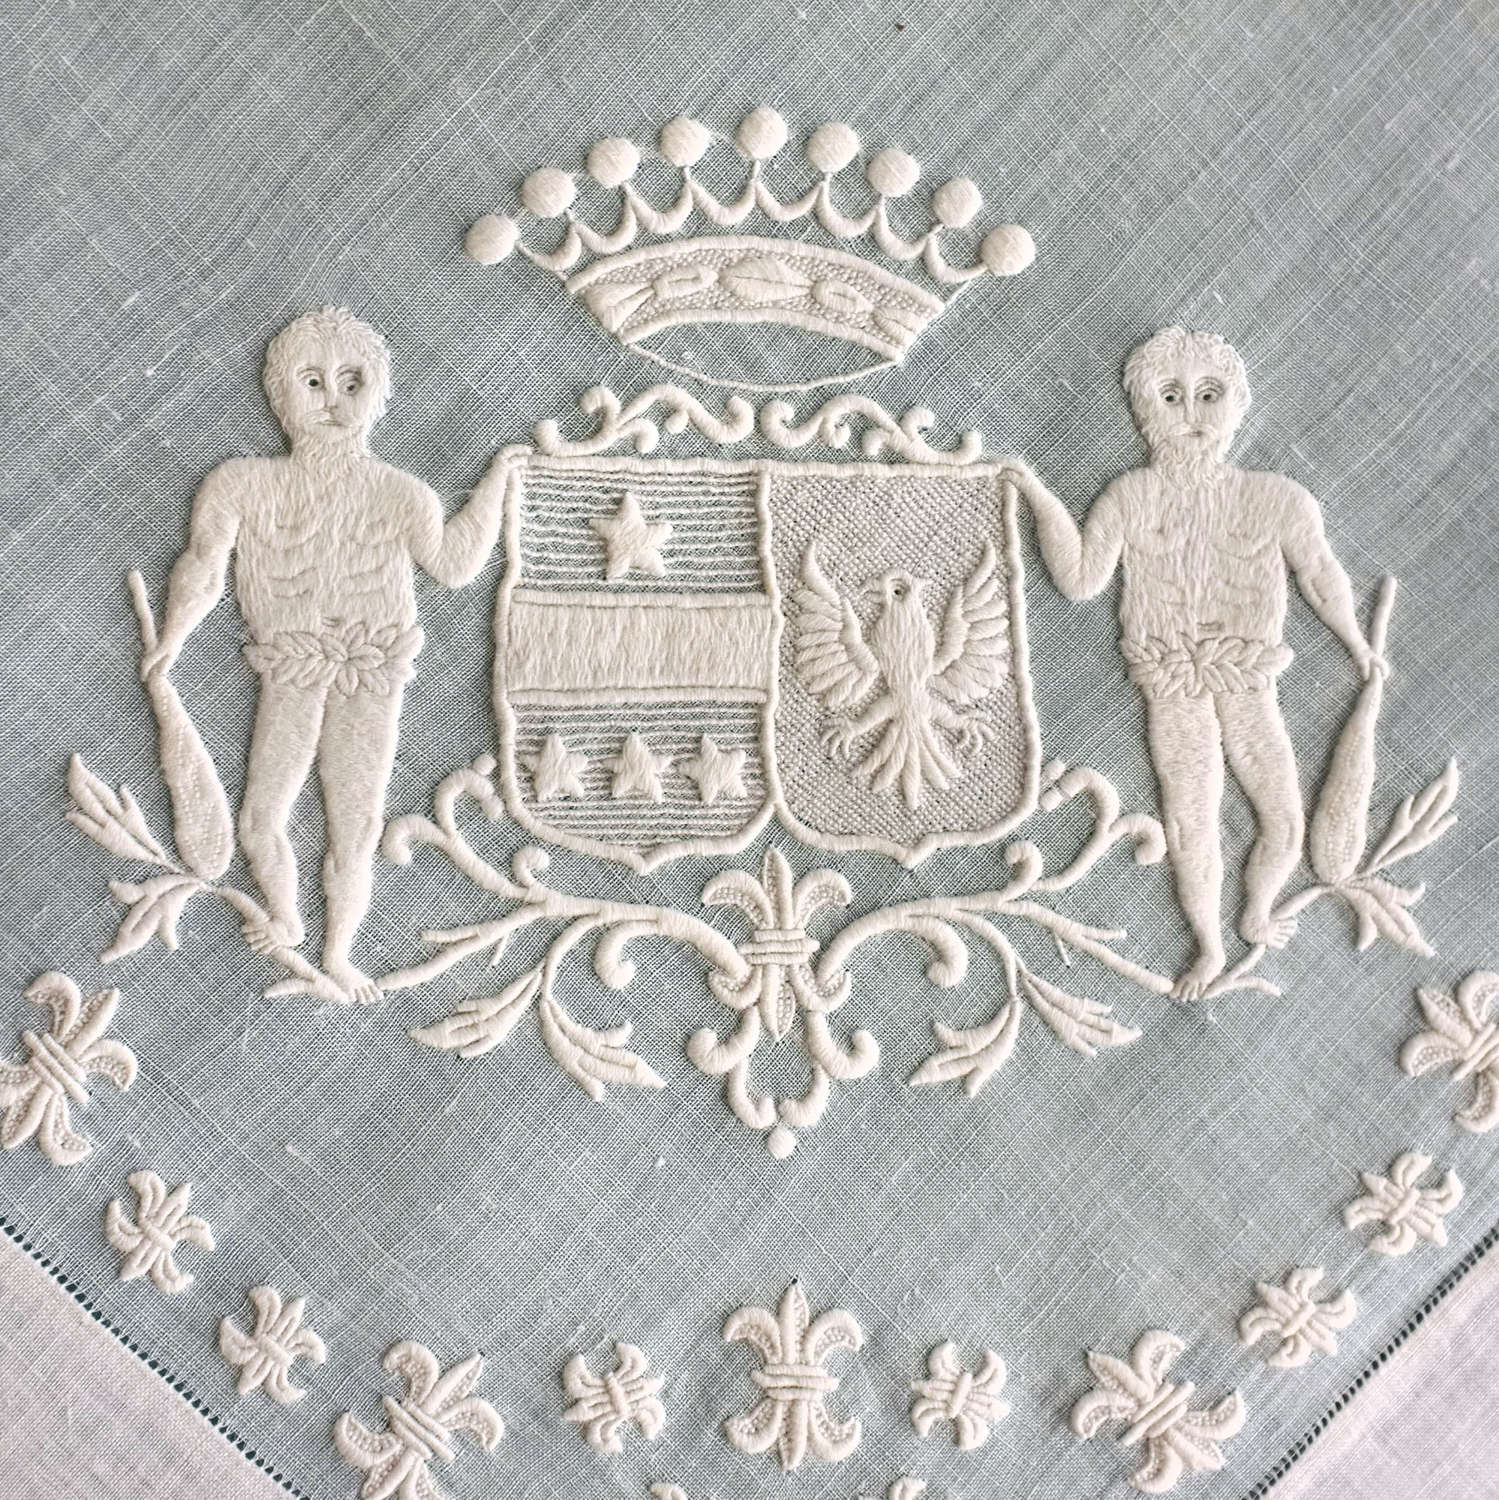 Antique French Whitework Handkerchief with Coronet of a Comte